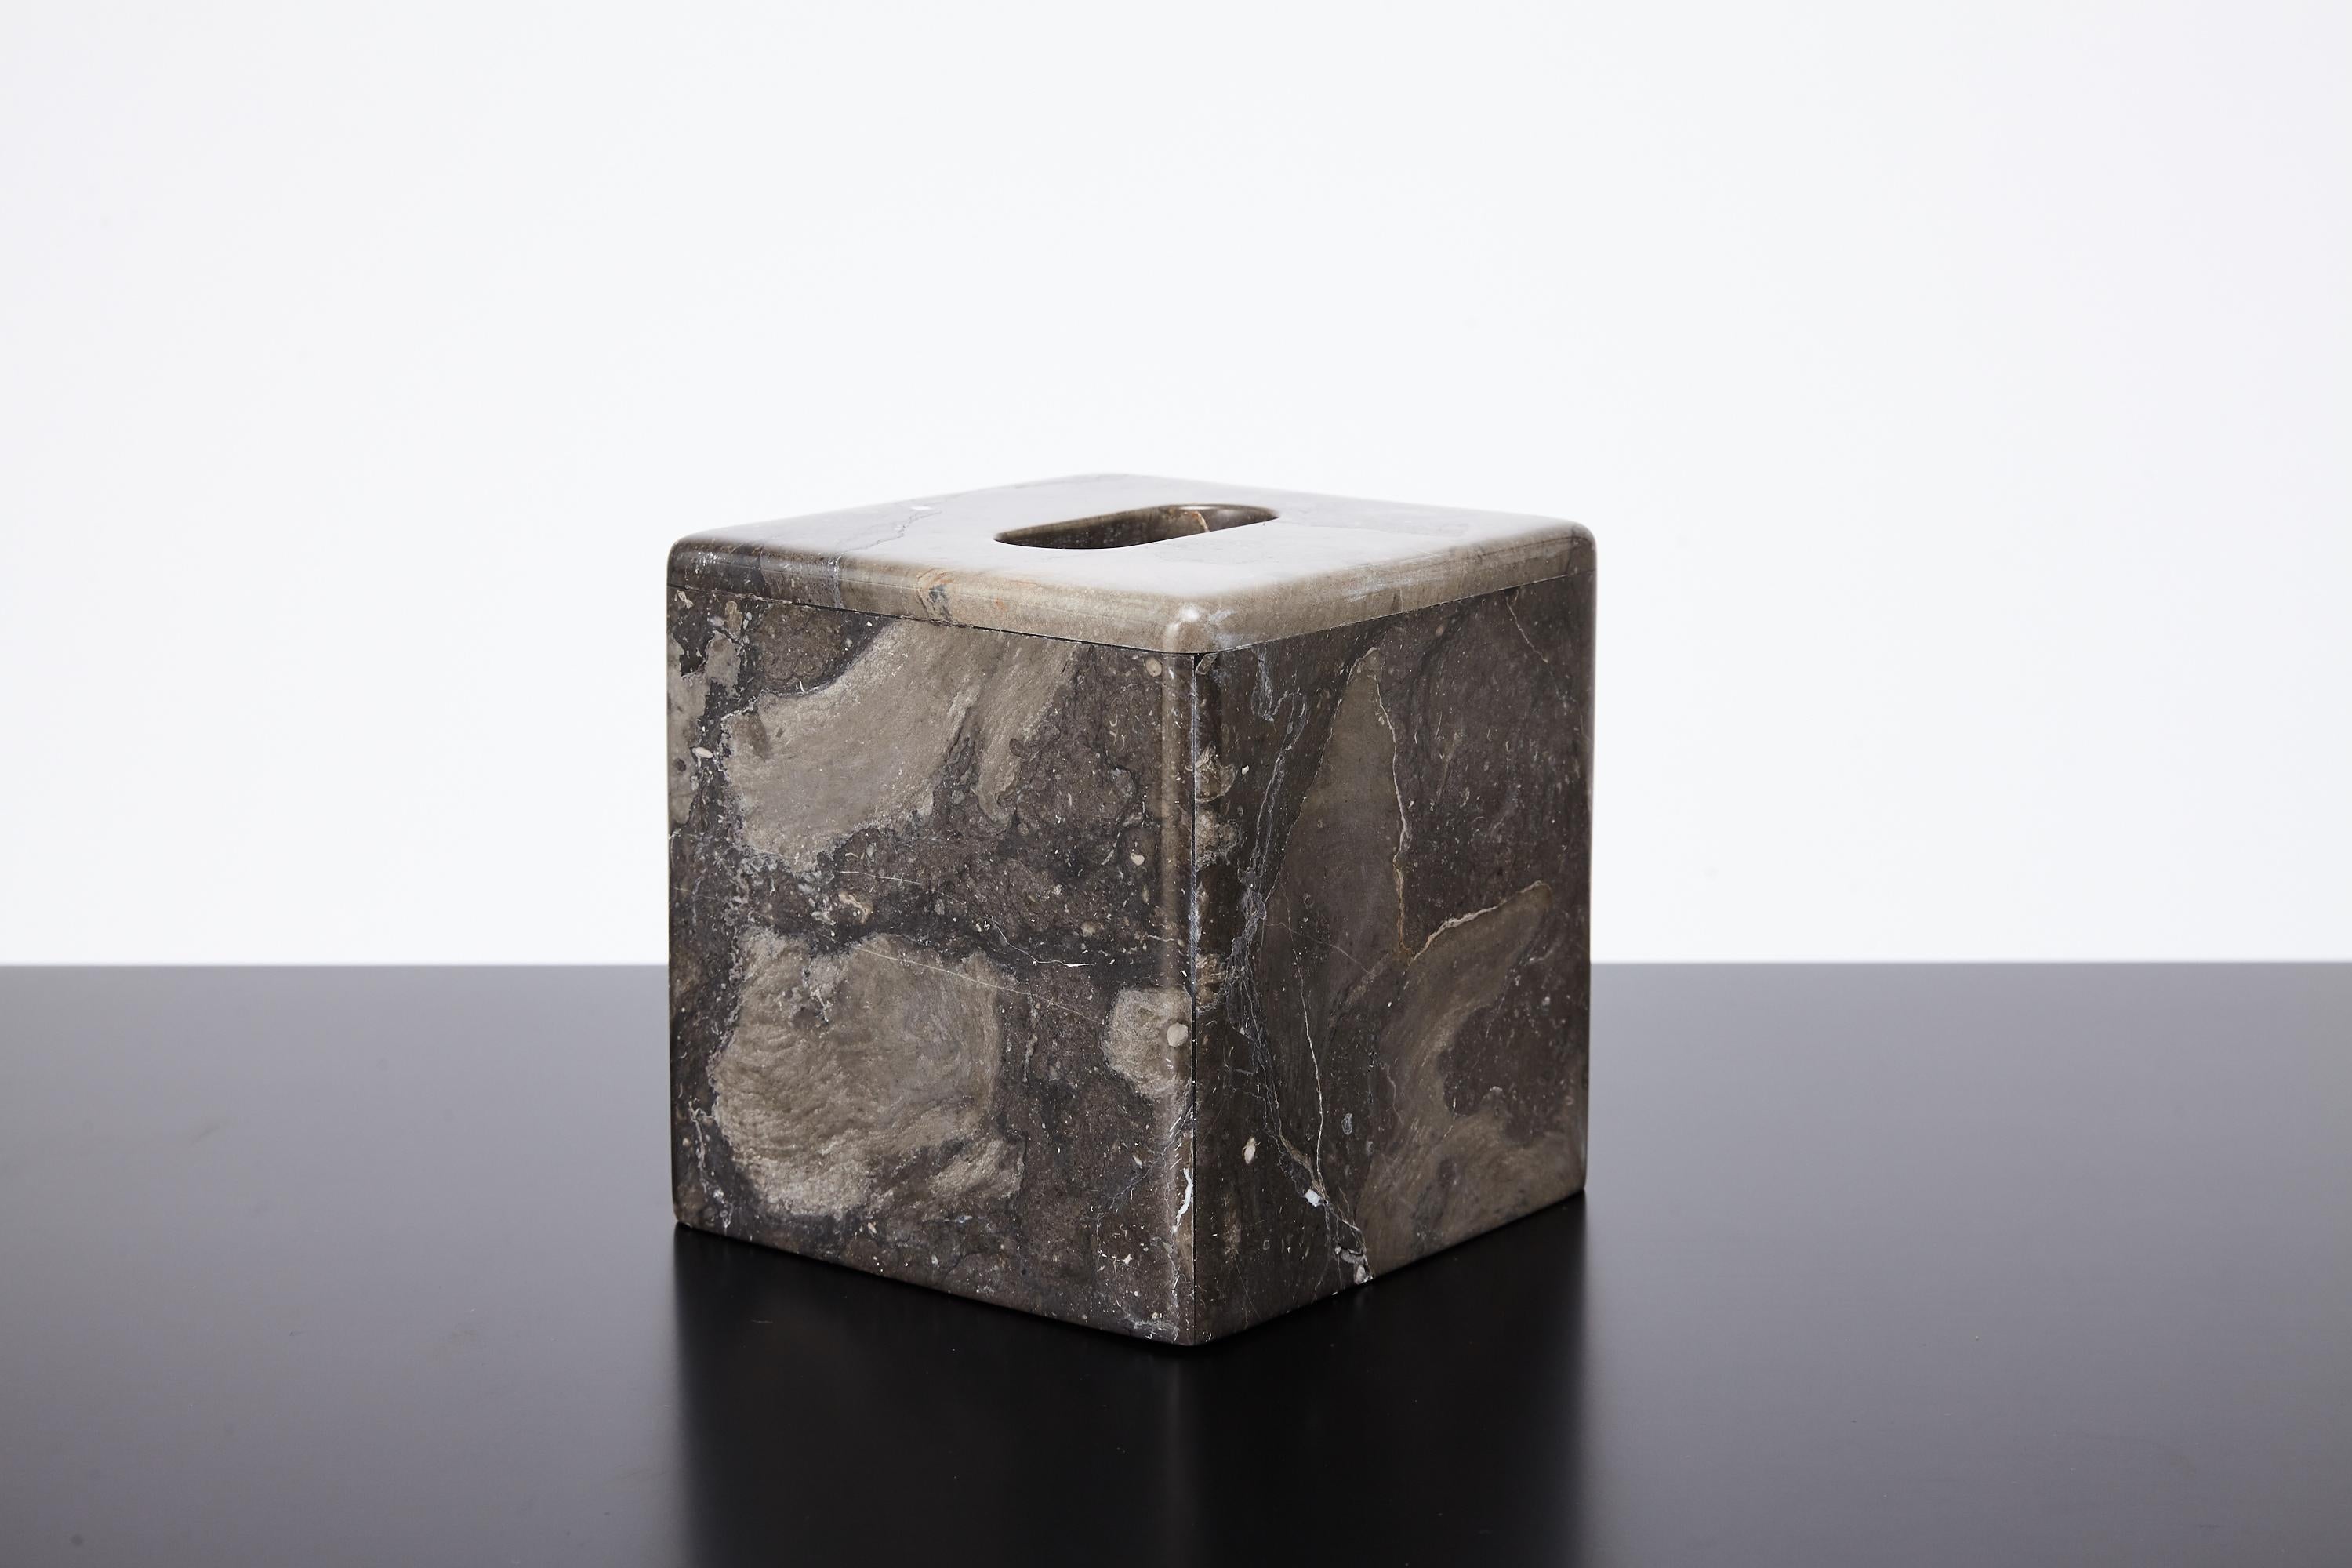 Minimally chic marble tissue box selected by Interior Designer Kelly Wearstler for her project - the Viceroy Miami, circa 2008. Kelly Wearstler is known to favor marbles with interesting veining or patters and you can gather from the photographs the